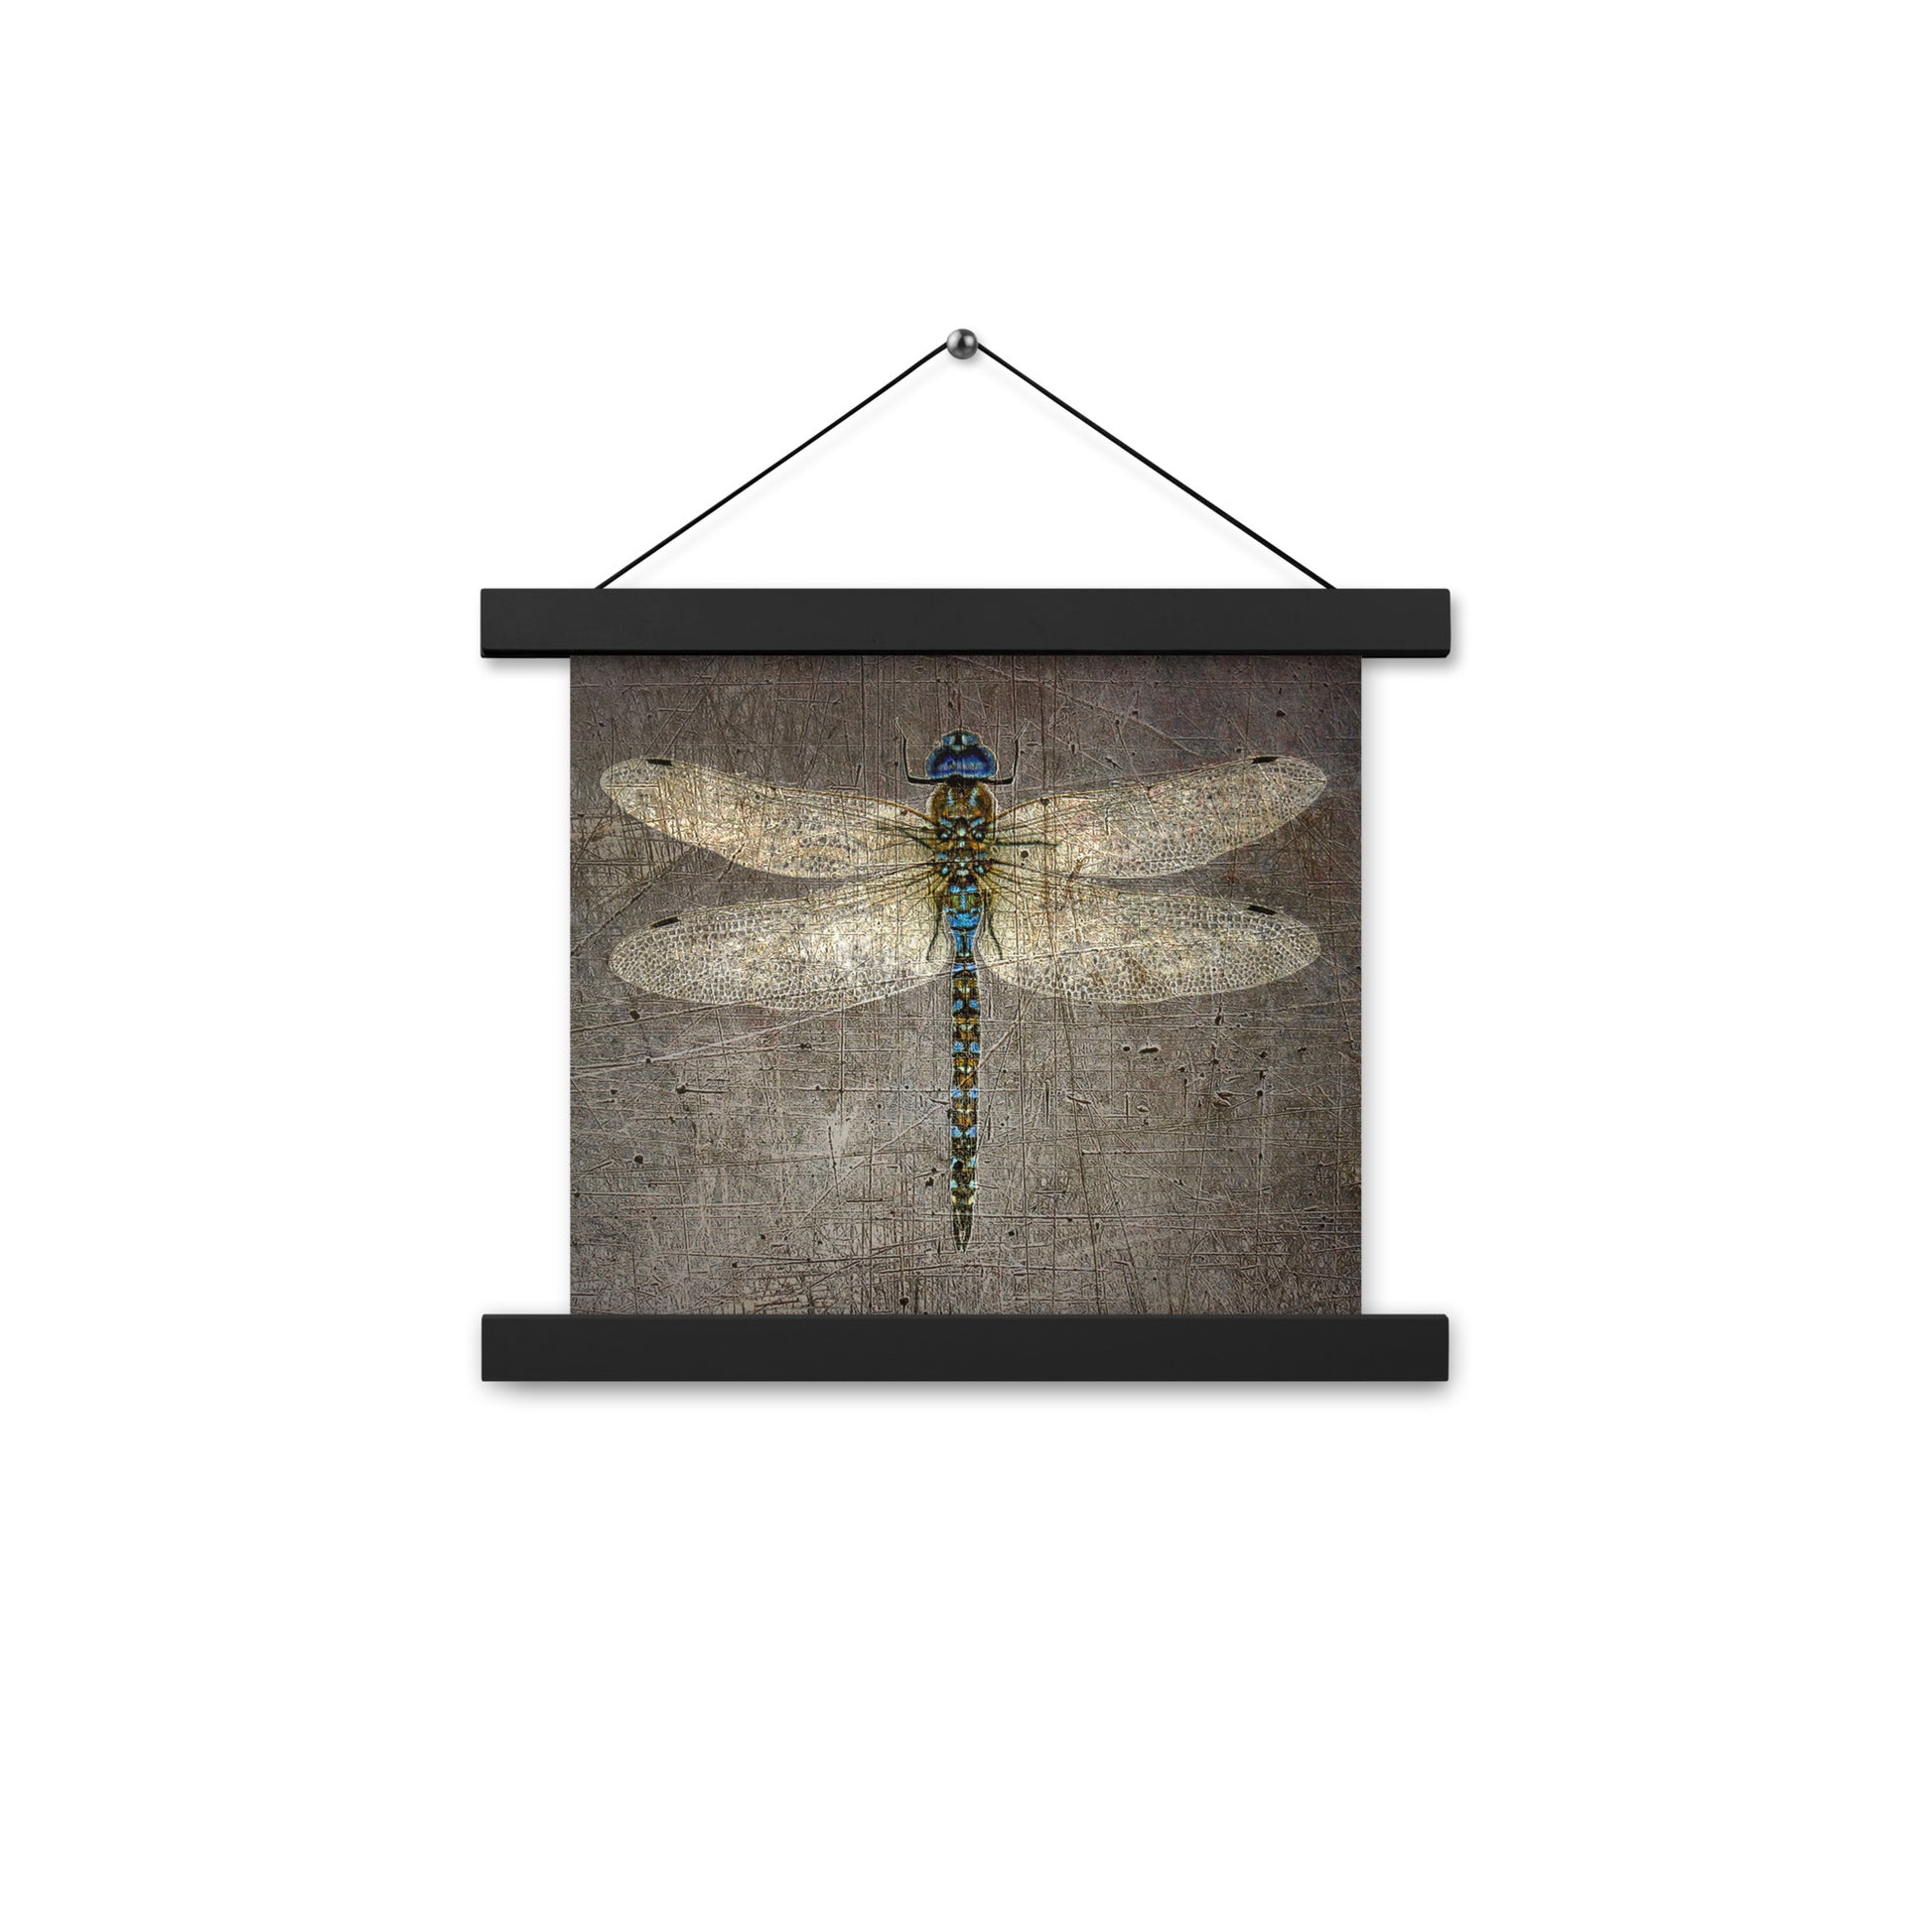 Dragonfly Themed Wall Hanging Dragonfly on Distressed Stone Background Print on Archival Paper with Magnetic Wood Hangers 14x14